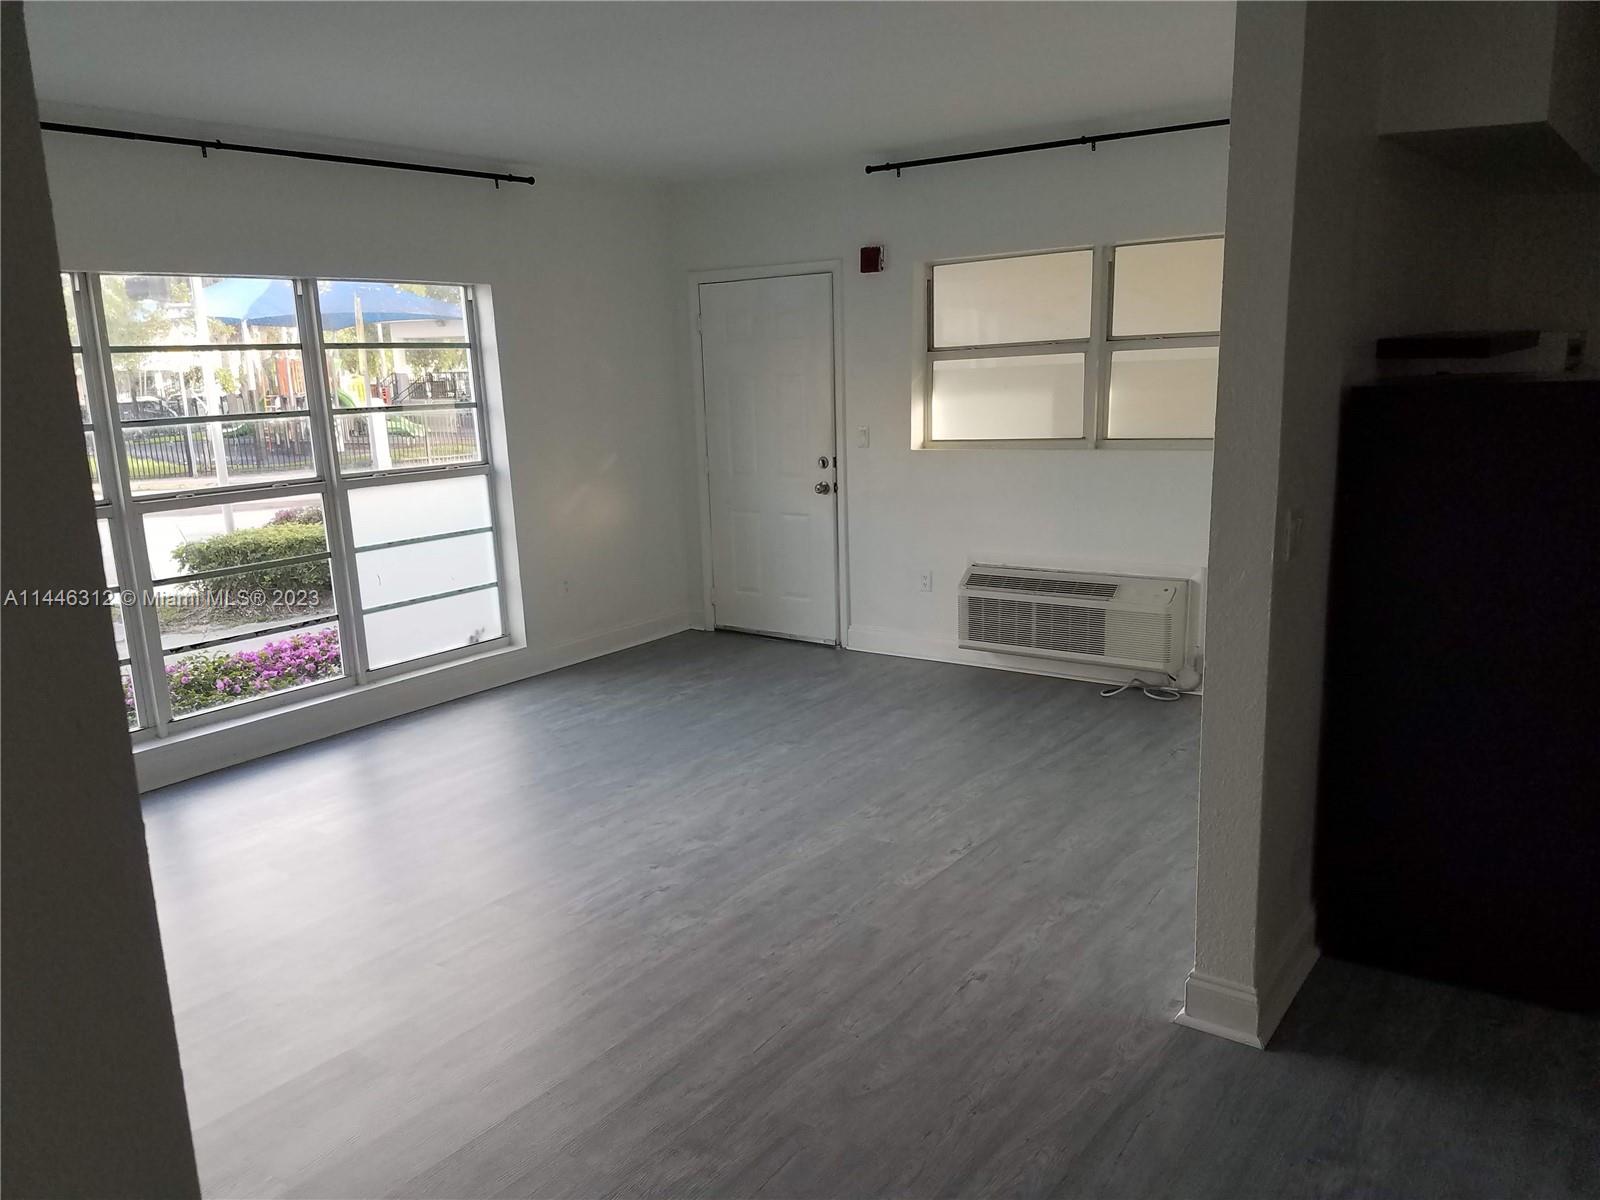 an empty room with windows and view of kitchen